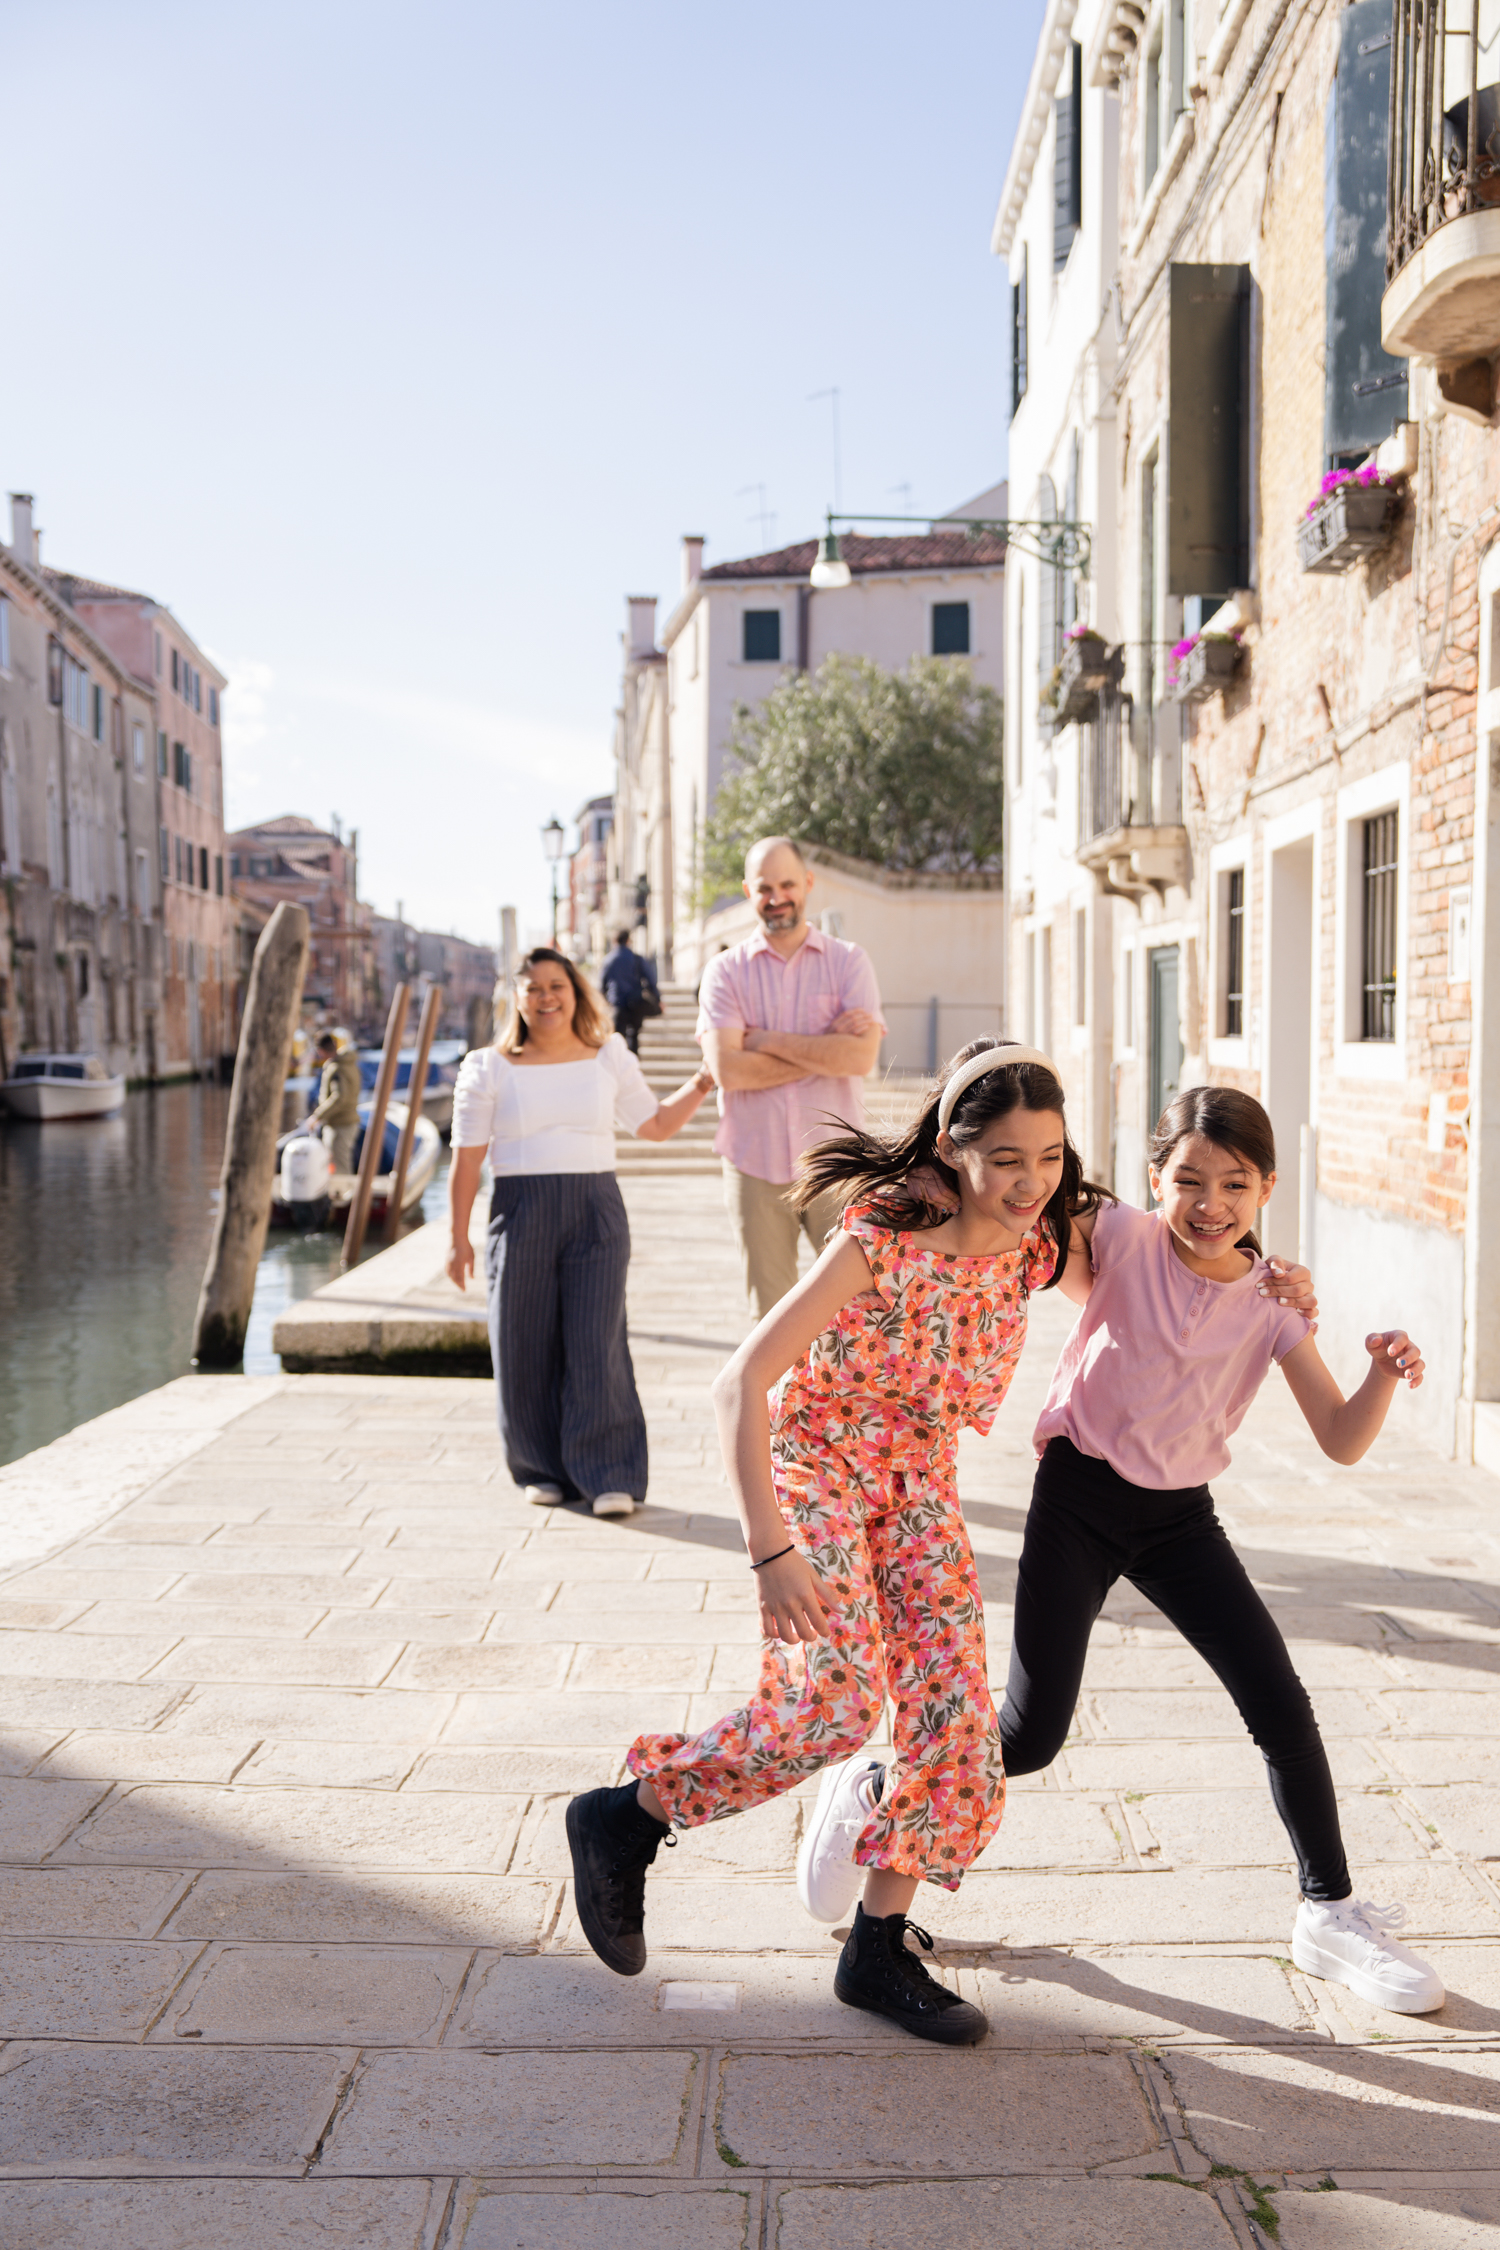 This family session is a proof that Venice photographer can make your experience unforgettable